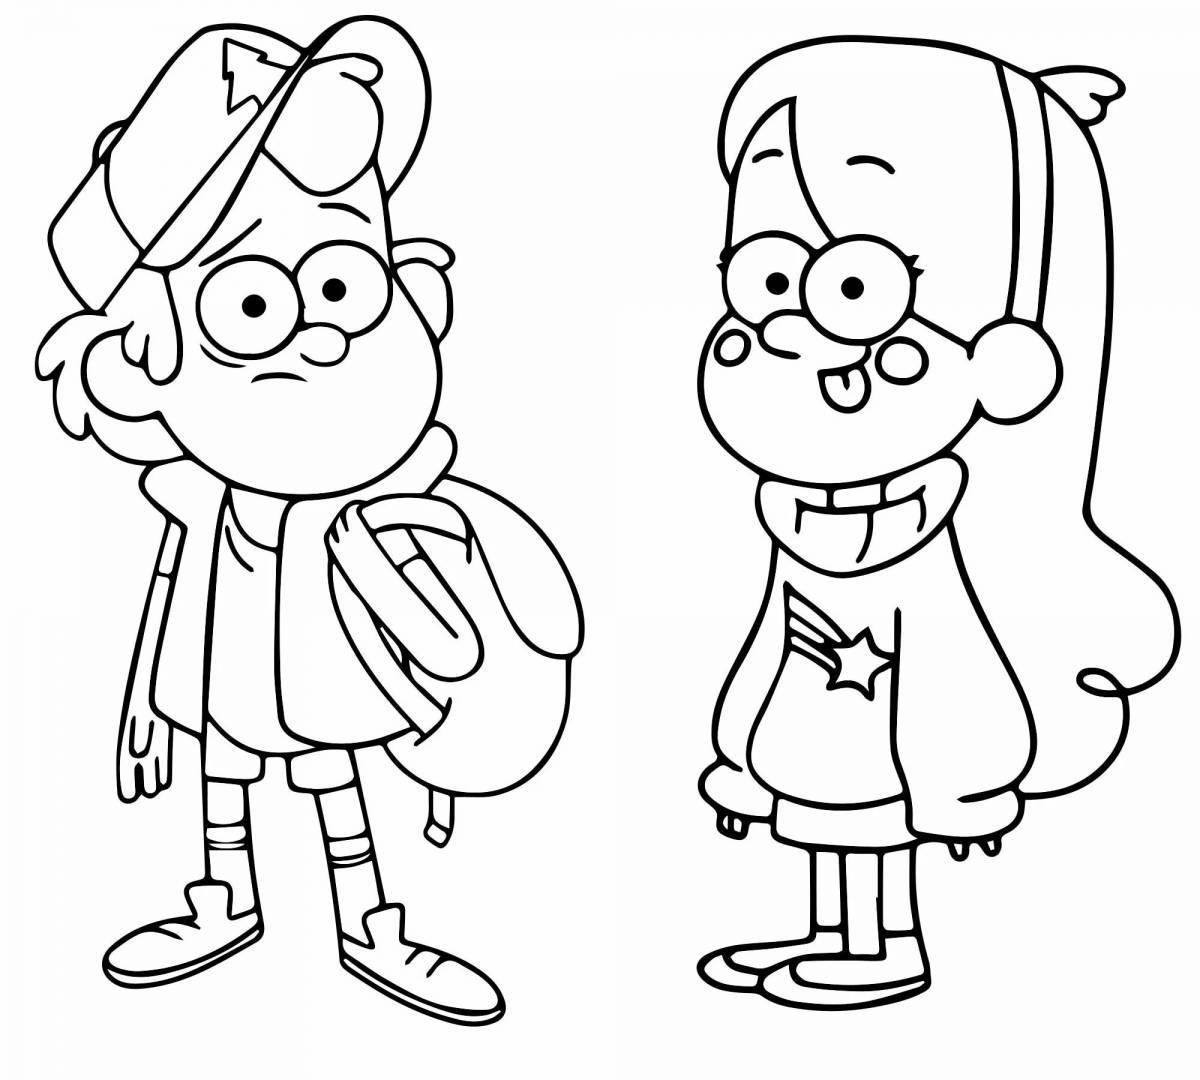 Charming coloring dipper and mabel